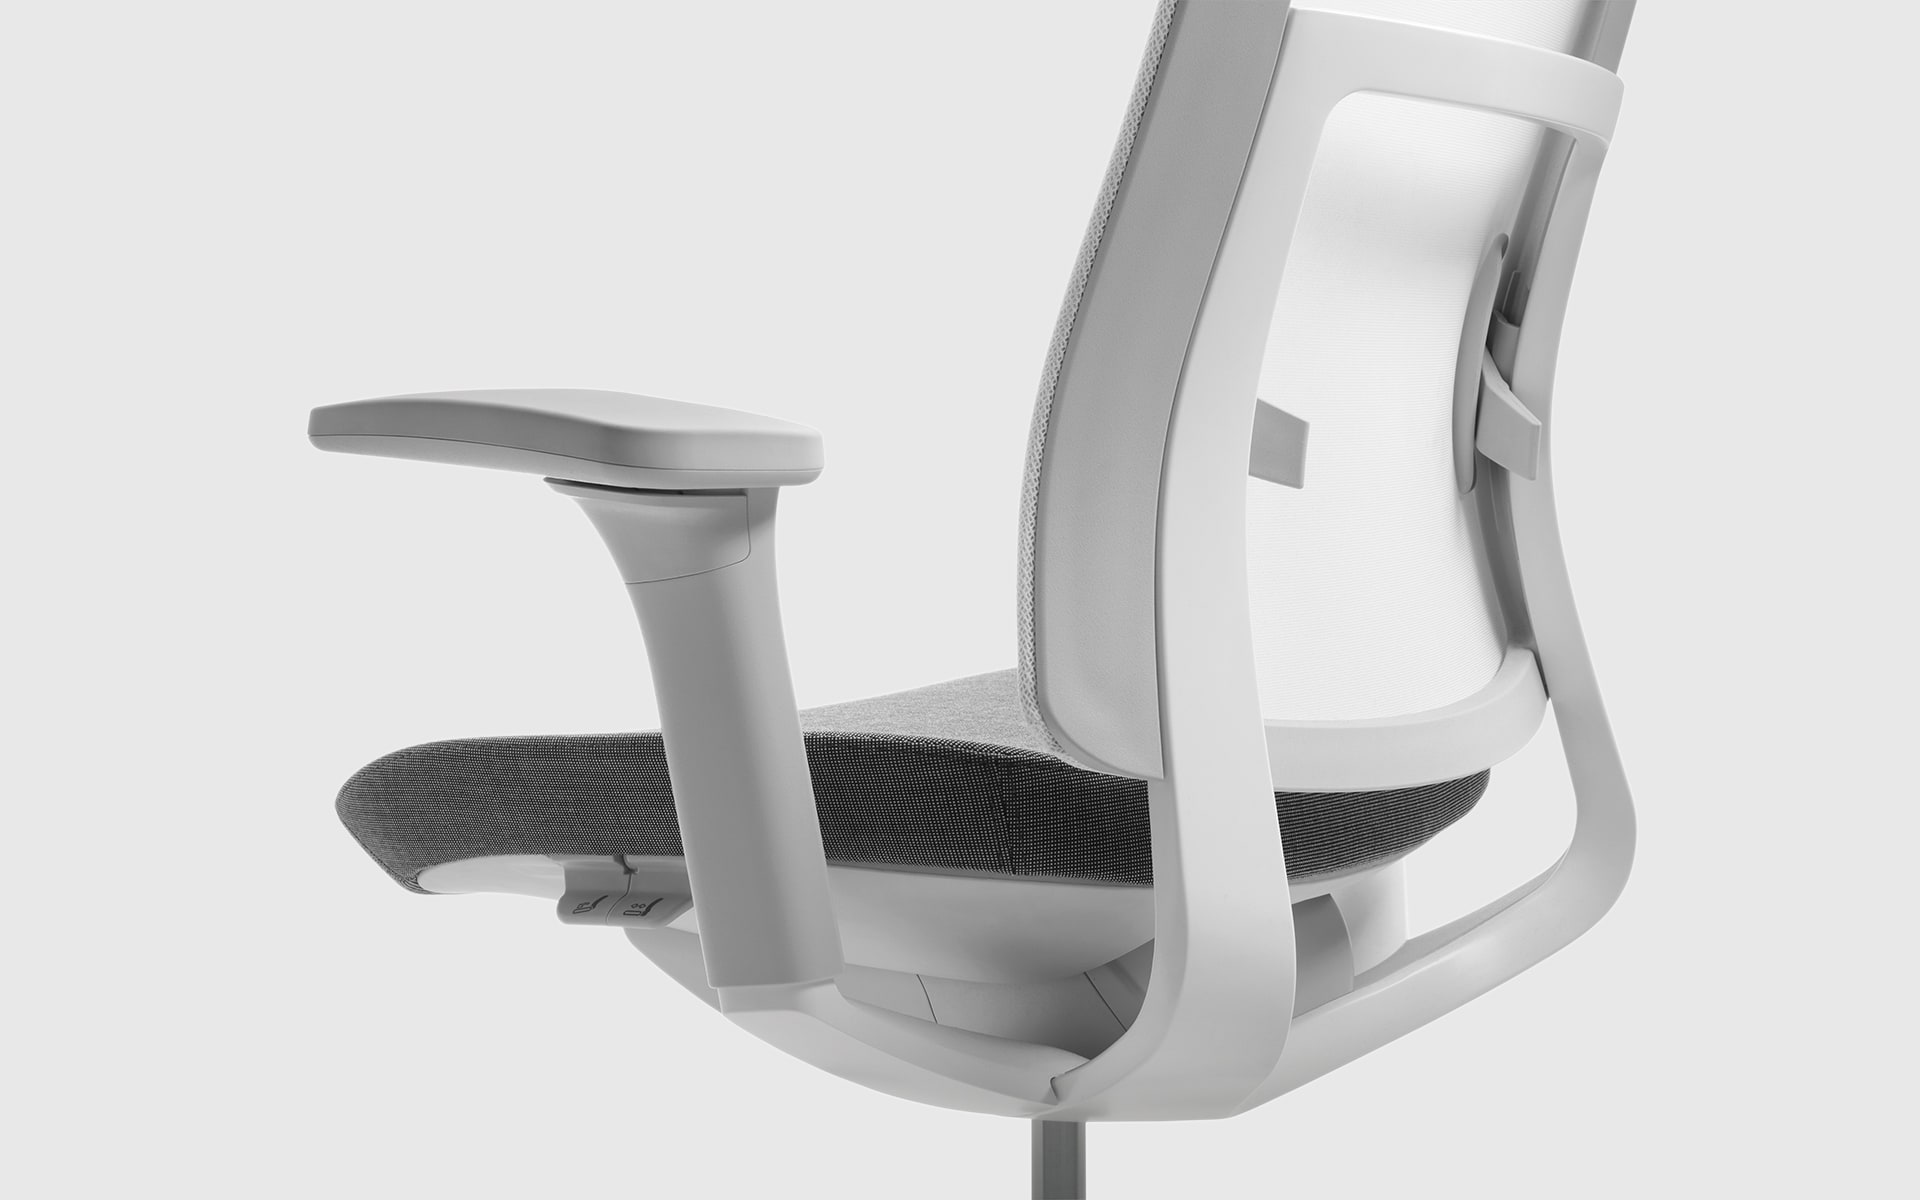 Close-up of the Profim Violle office chair by ITO Design in white and grey